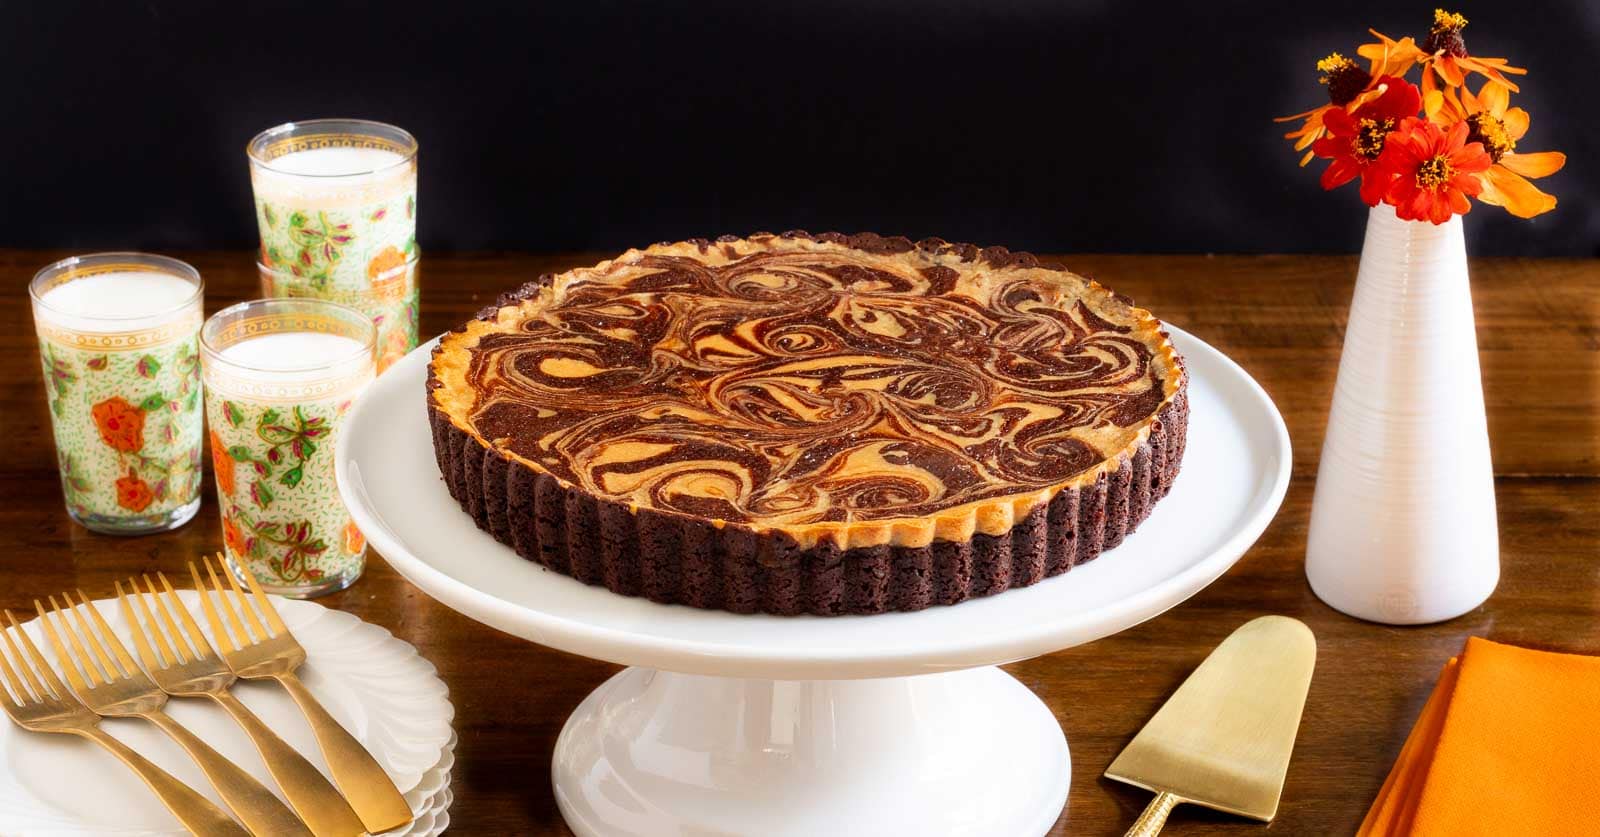 Horizontal photo of a Ridiculously Easy Caramel Cream Cheese Tart on a white pedestal serving plate surrounded by dinnerware and glasses of milk.